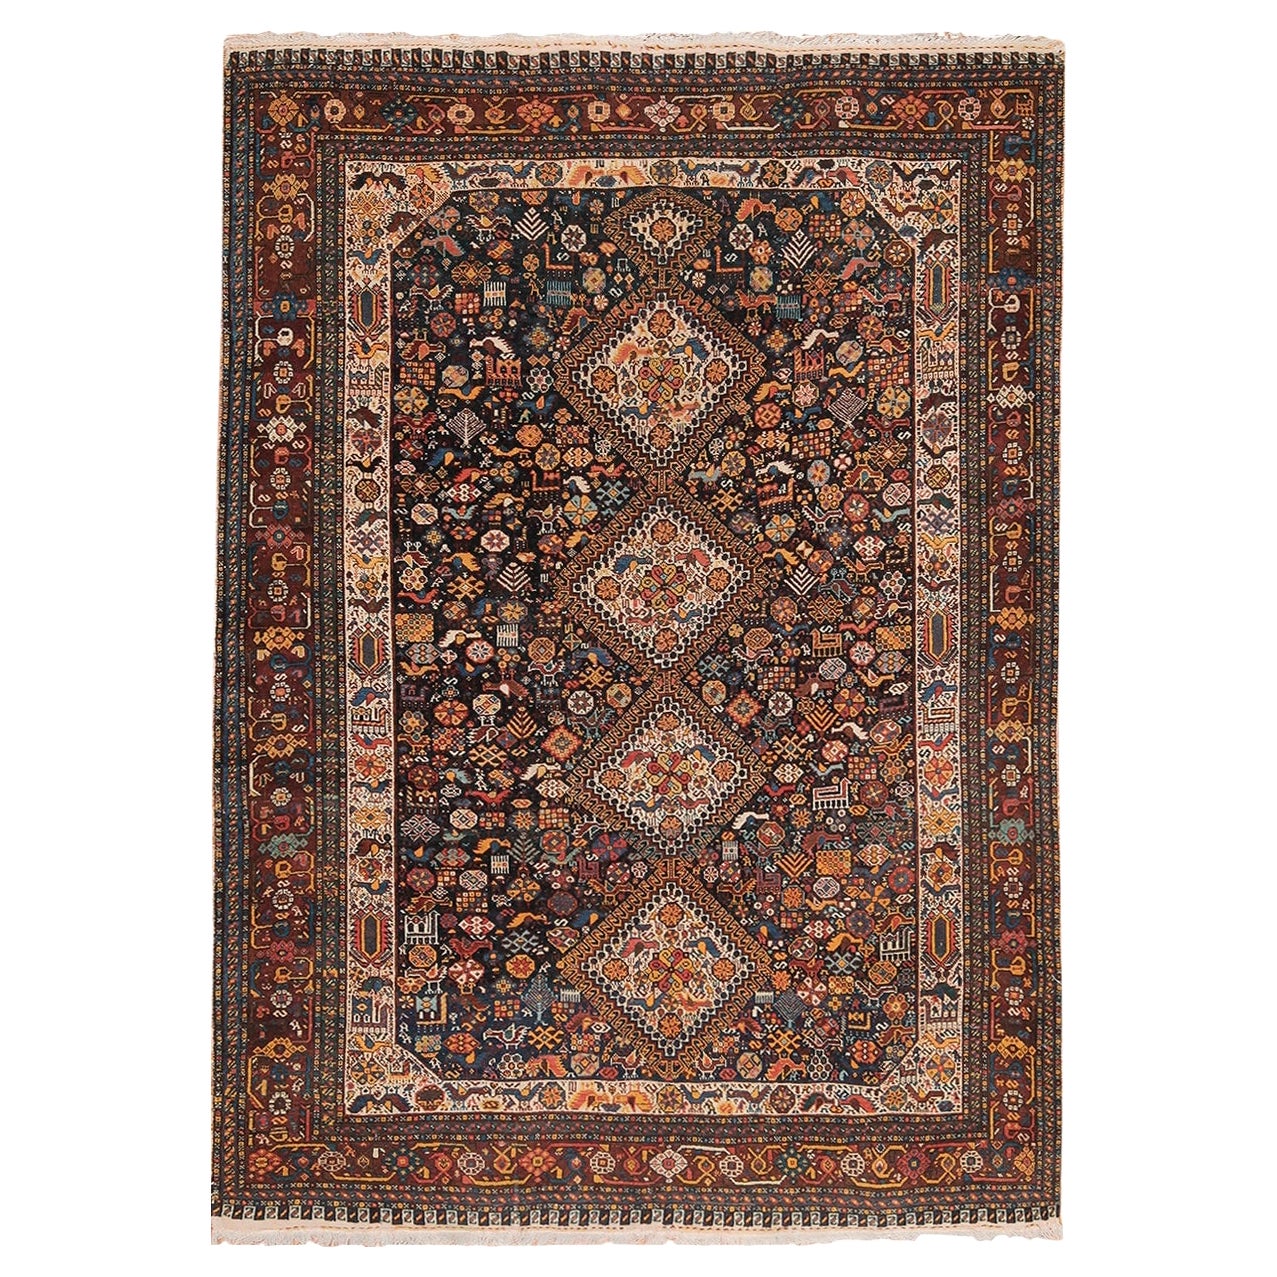 Tribal Antique Persian Qashqai Rug. Size: 4 ft 7 in x 6 ft 3 in (1.4 m x 1.9 m)